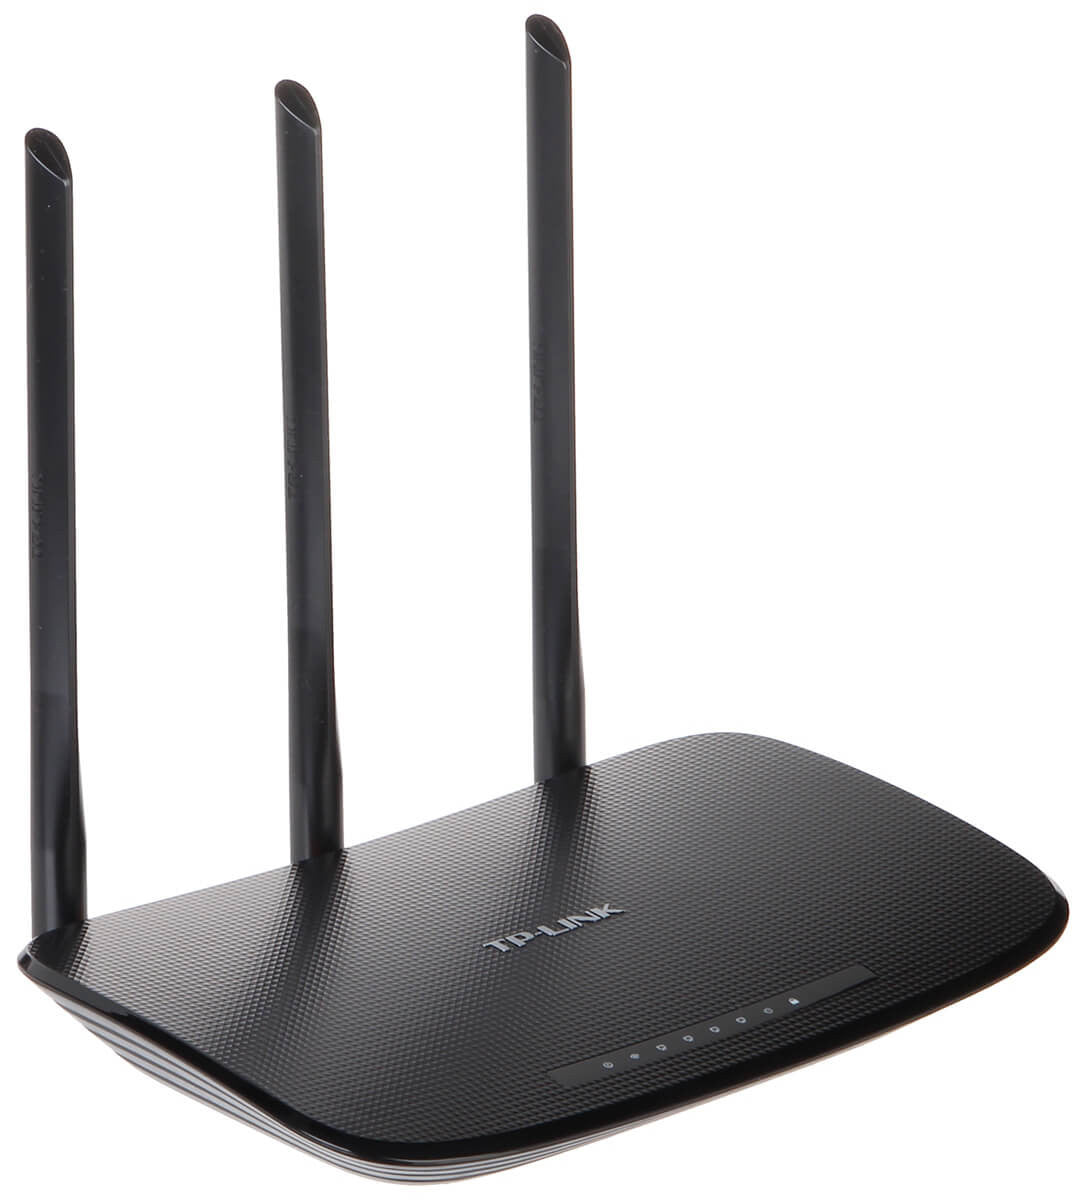 TP-Link WR940N 450Mbps Wi-Fi Router